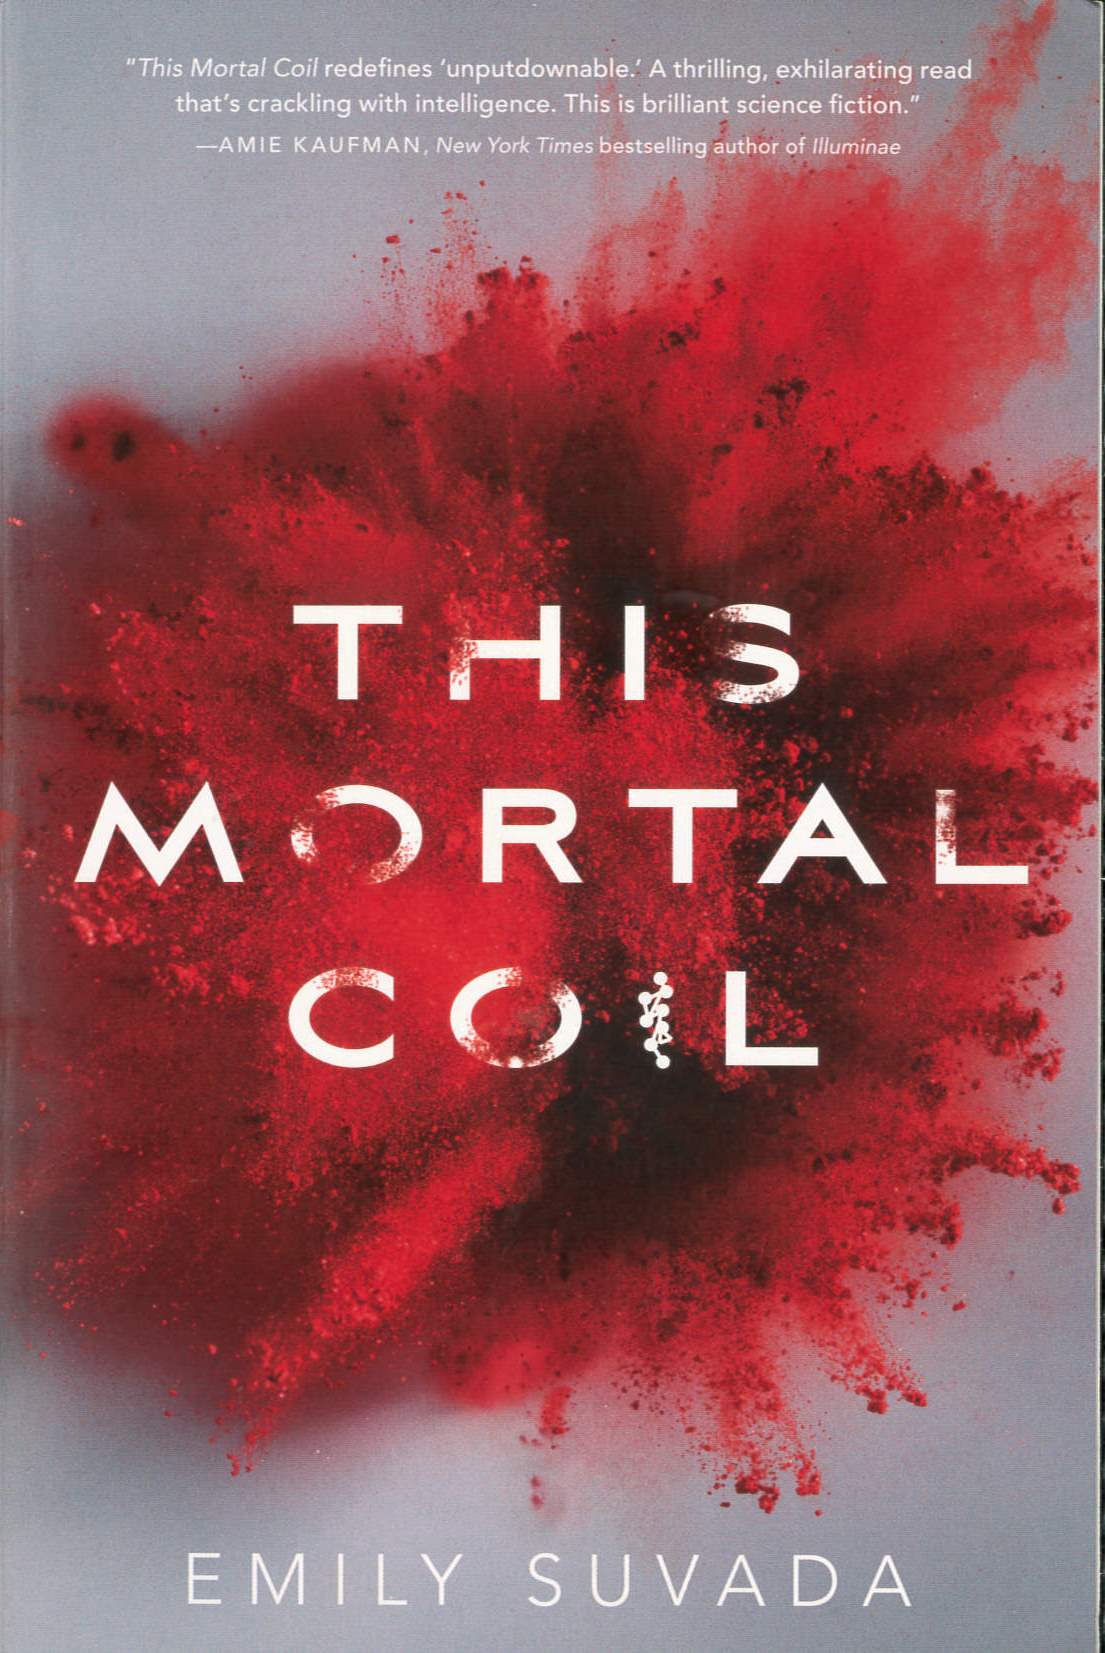 This mortal coil /